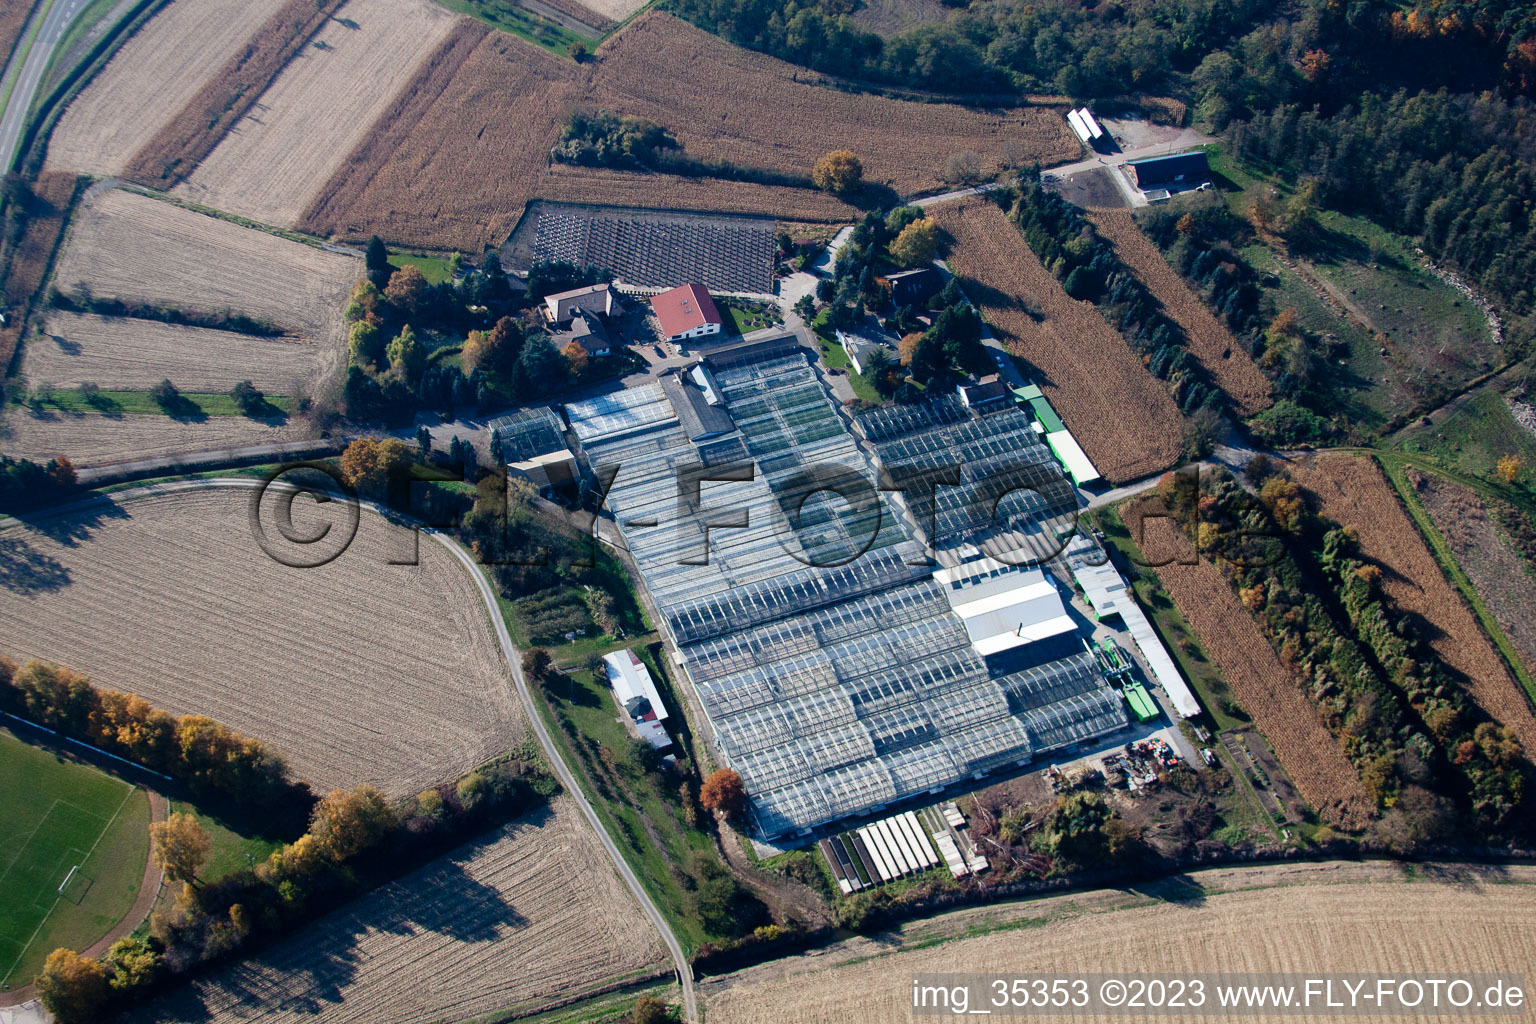 Geranium Endisch GmbH in Hagenbach in the state Rhineland-Palatinate, Germany from the plane